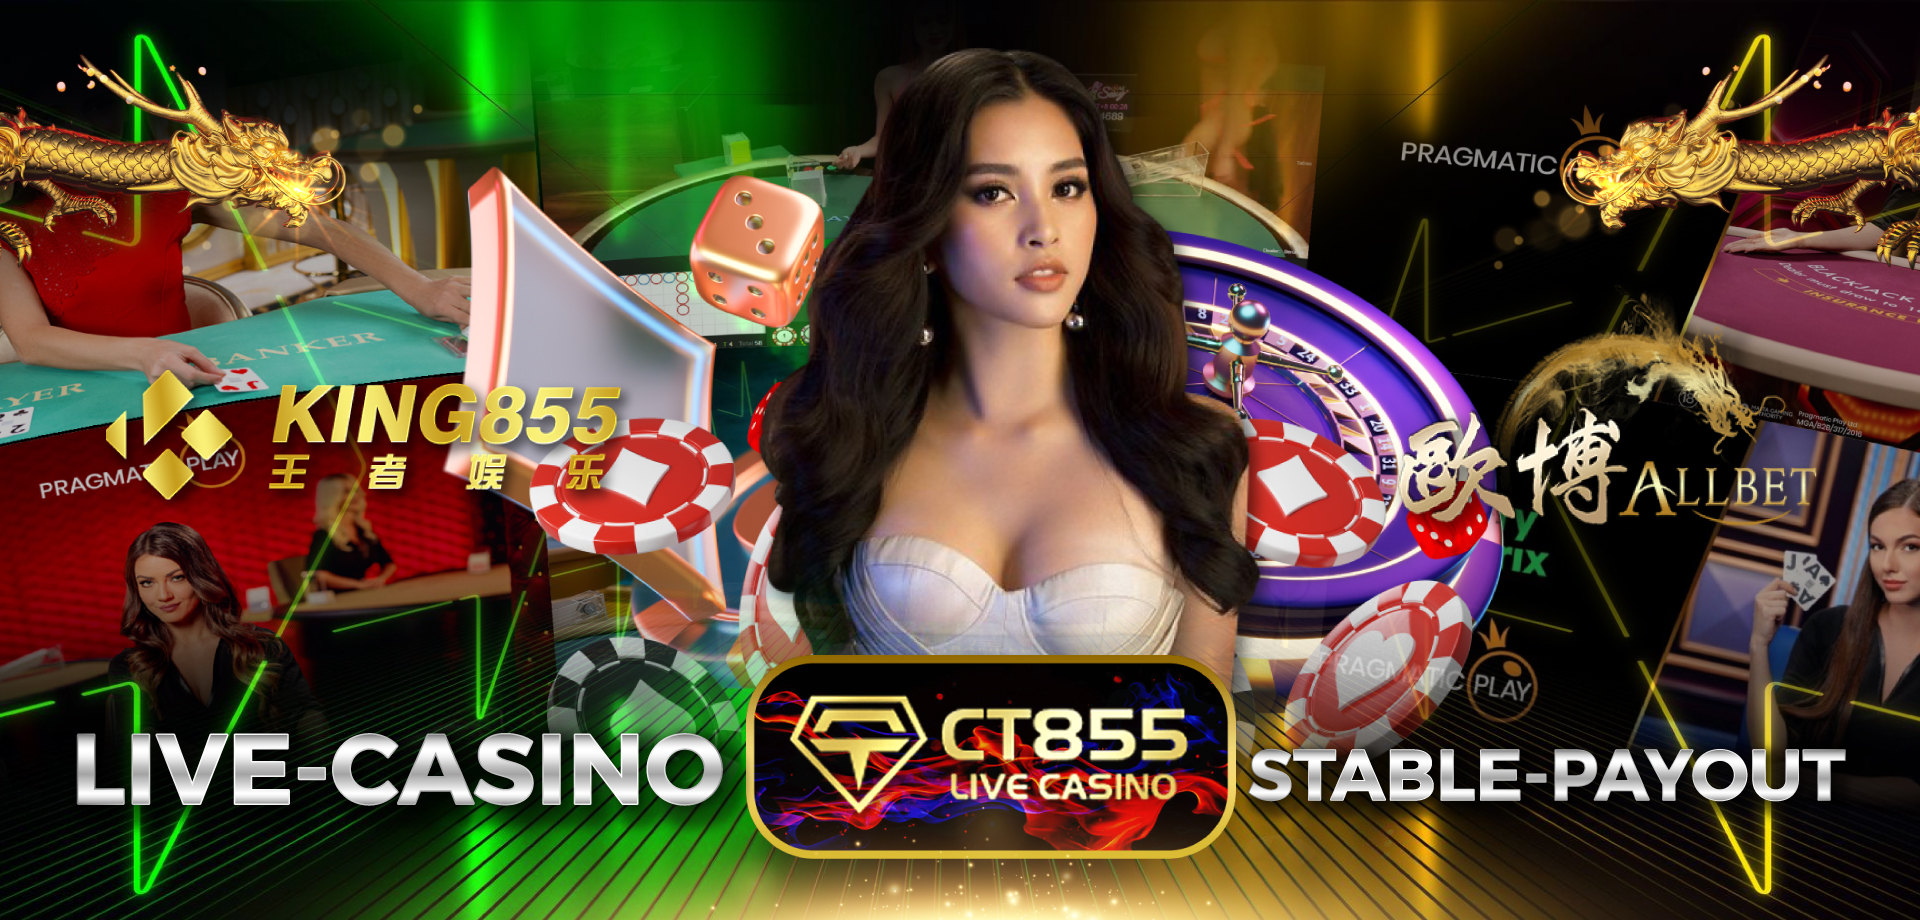 Live-Casino Stable-Payout